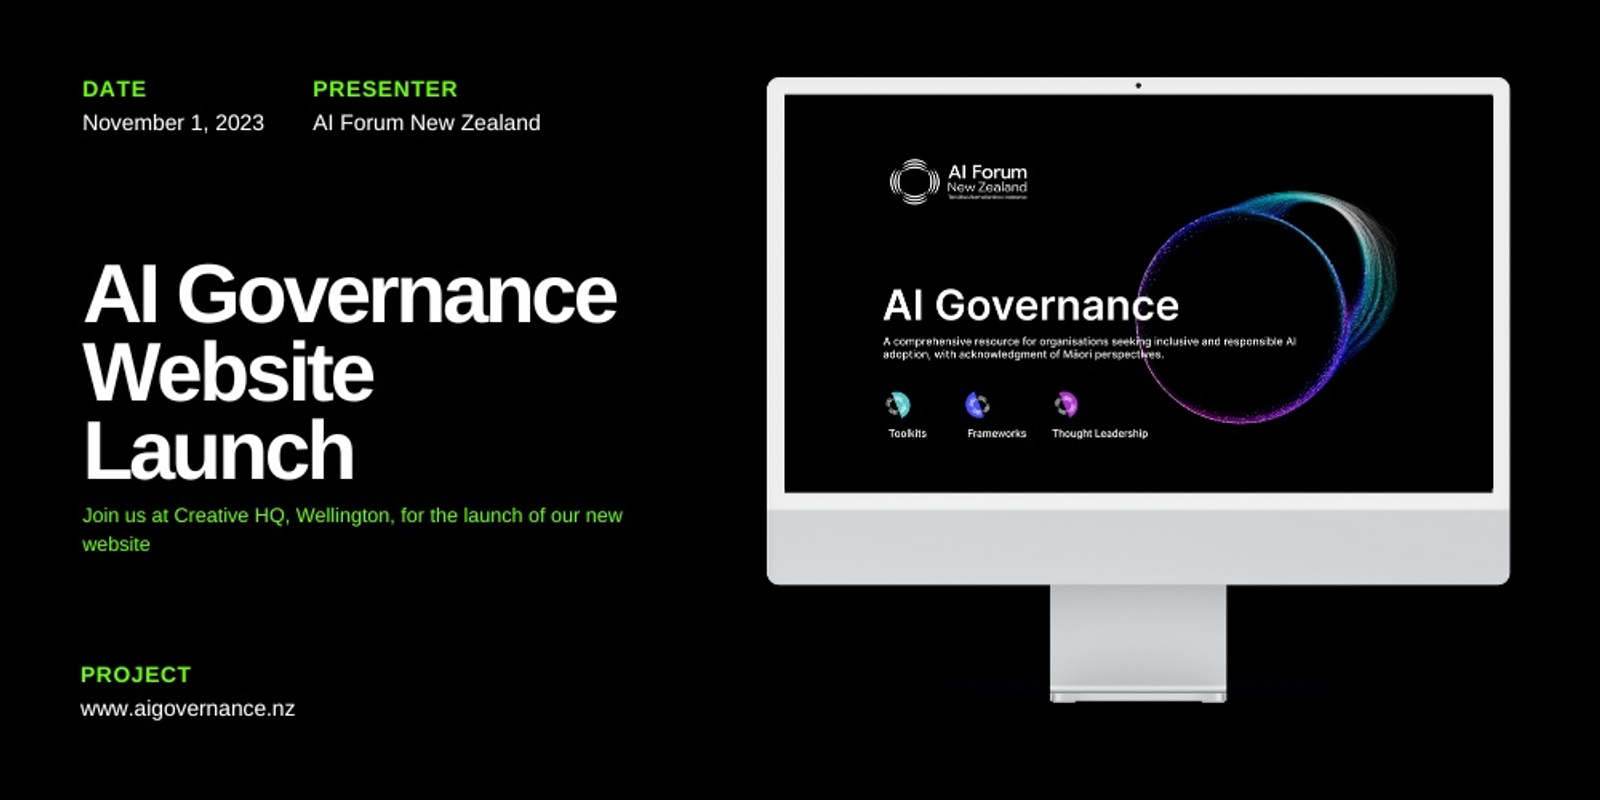 Banner image for AI Forum NZ’s AI Governance Website Launch